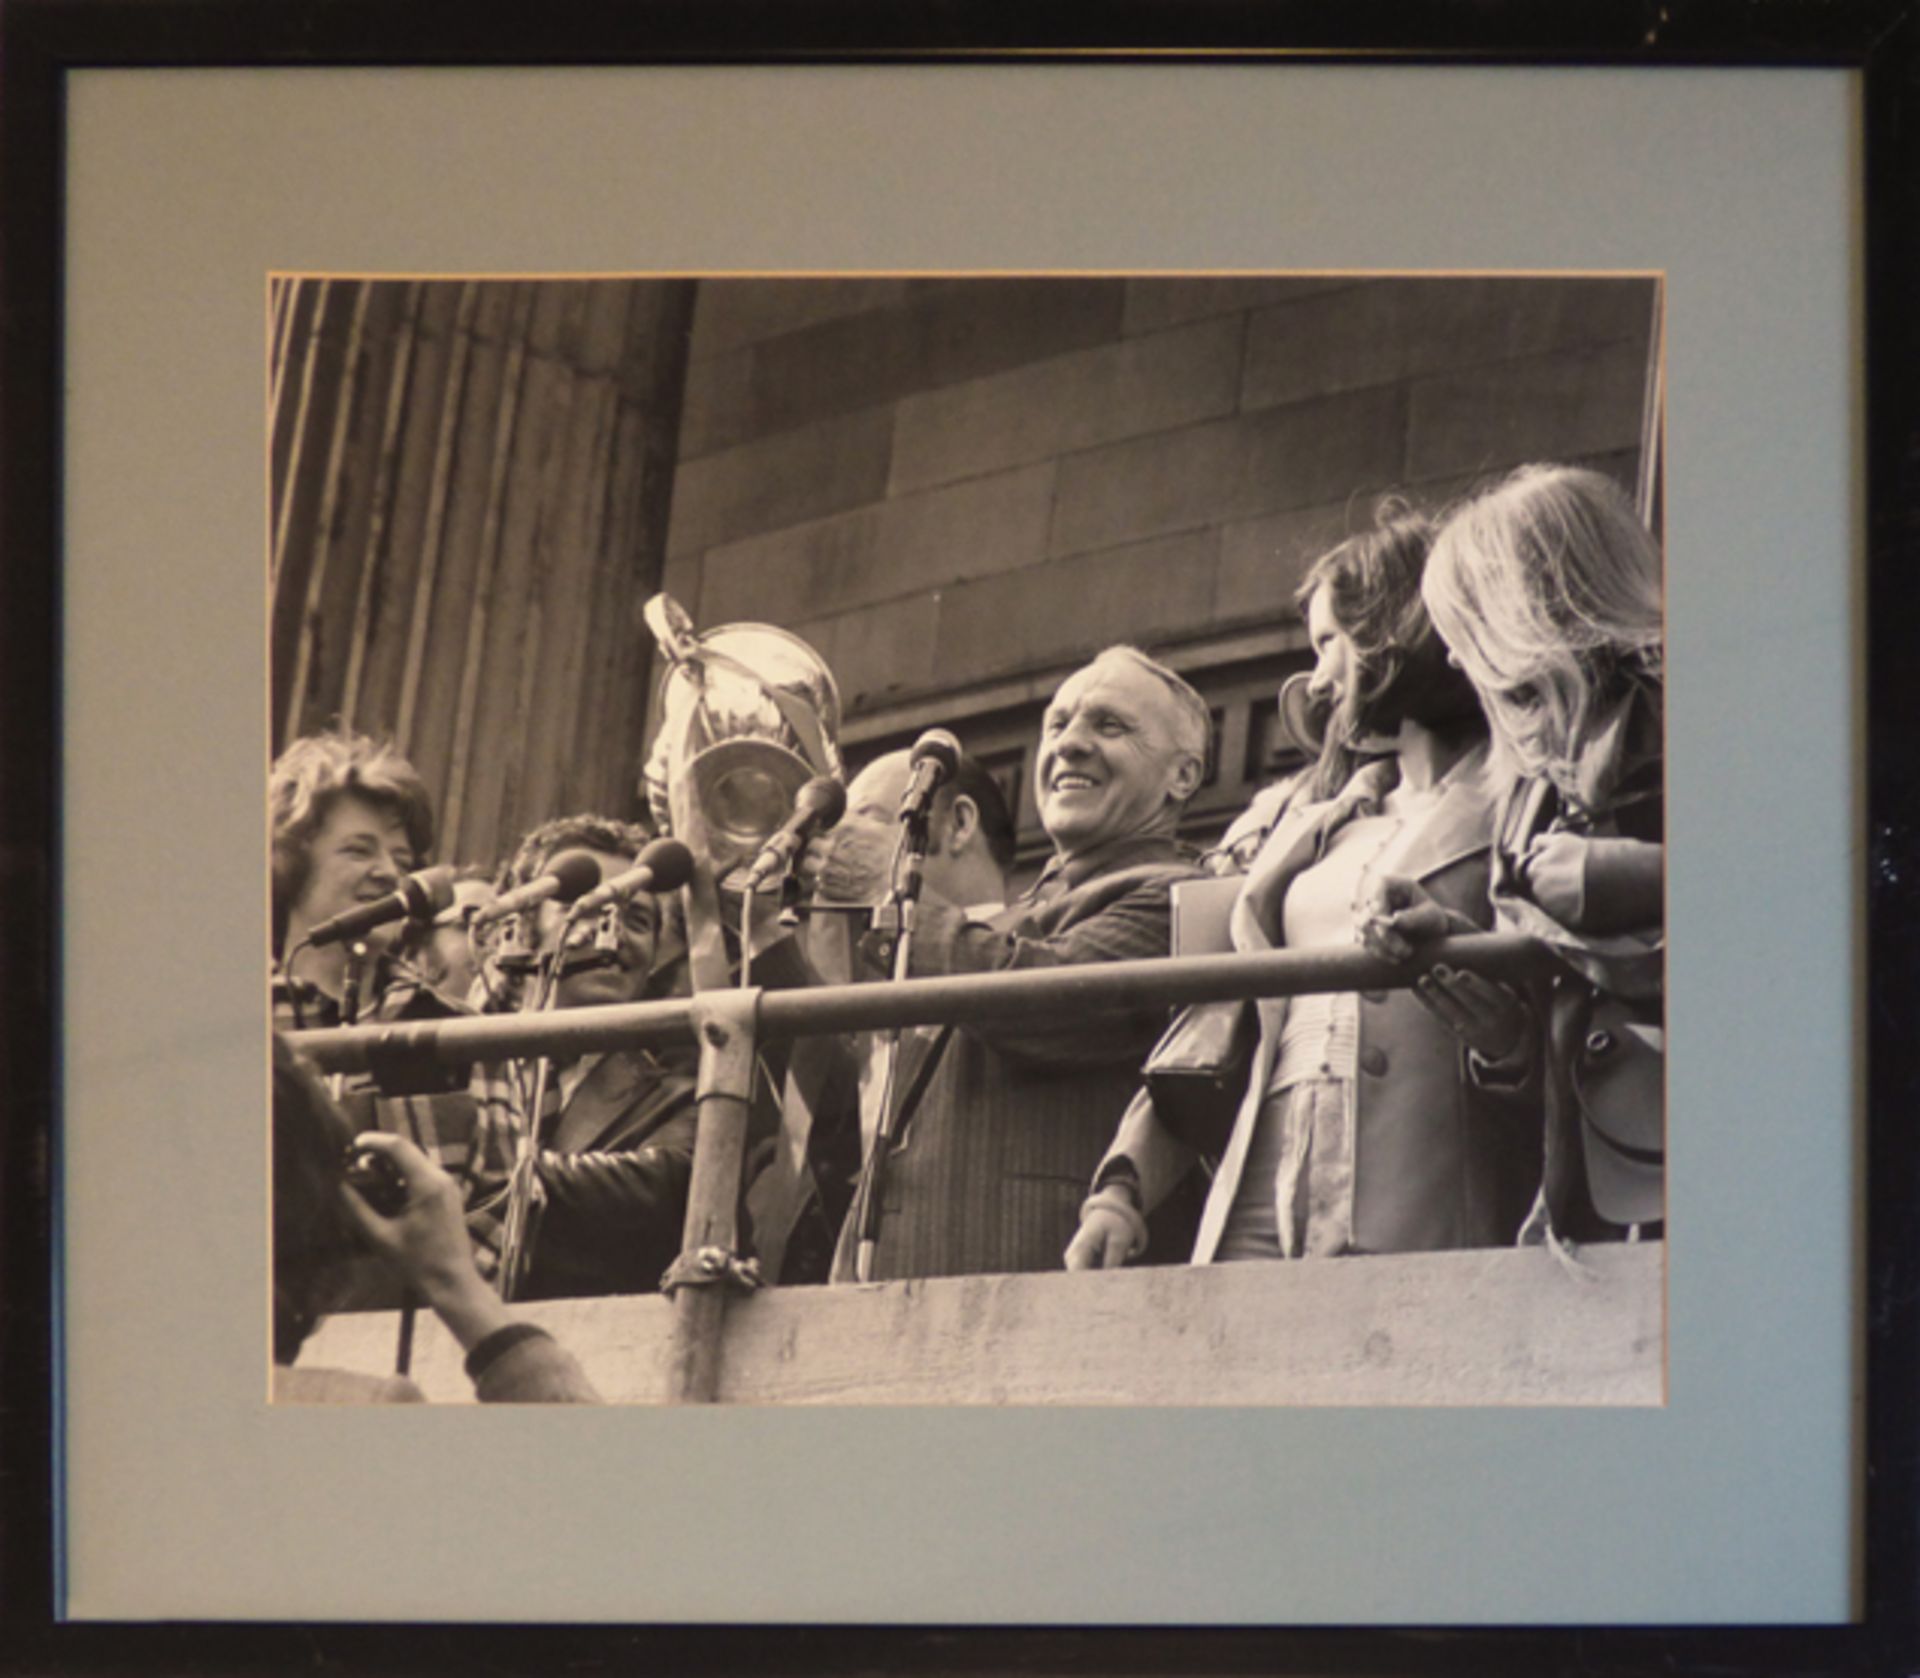 Framed and mounted b&w photograph removed from the corridor beside the Director's Lounge at